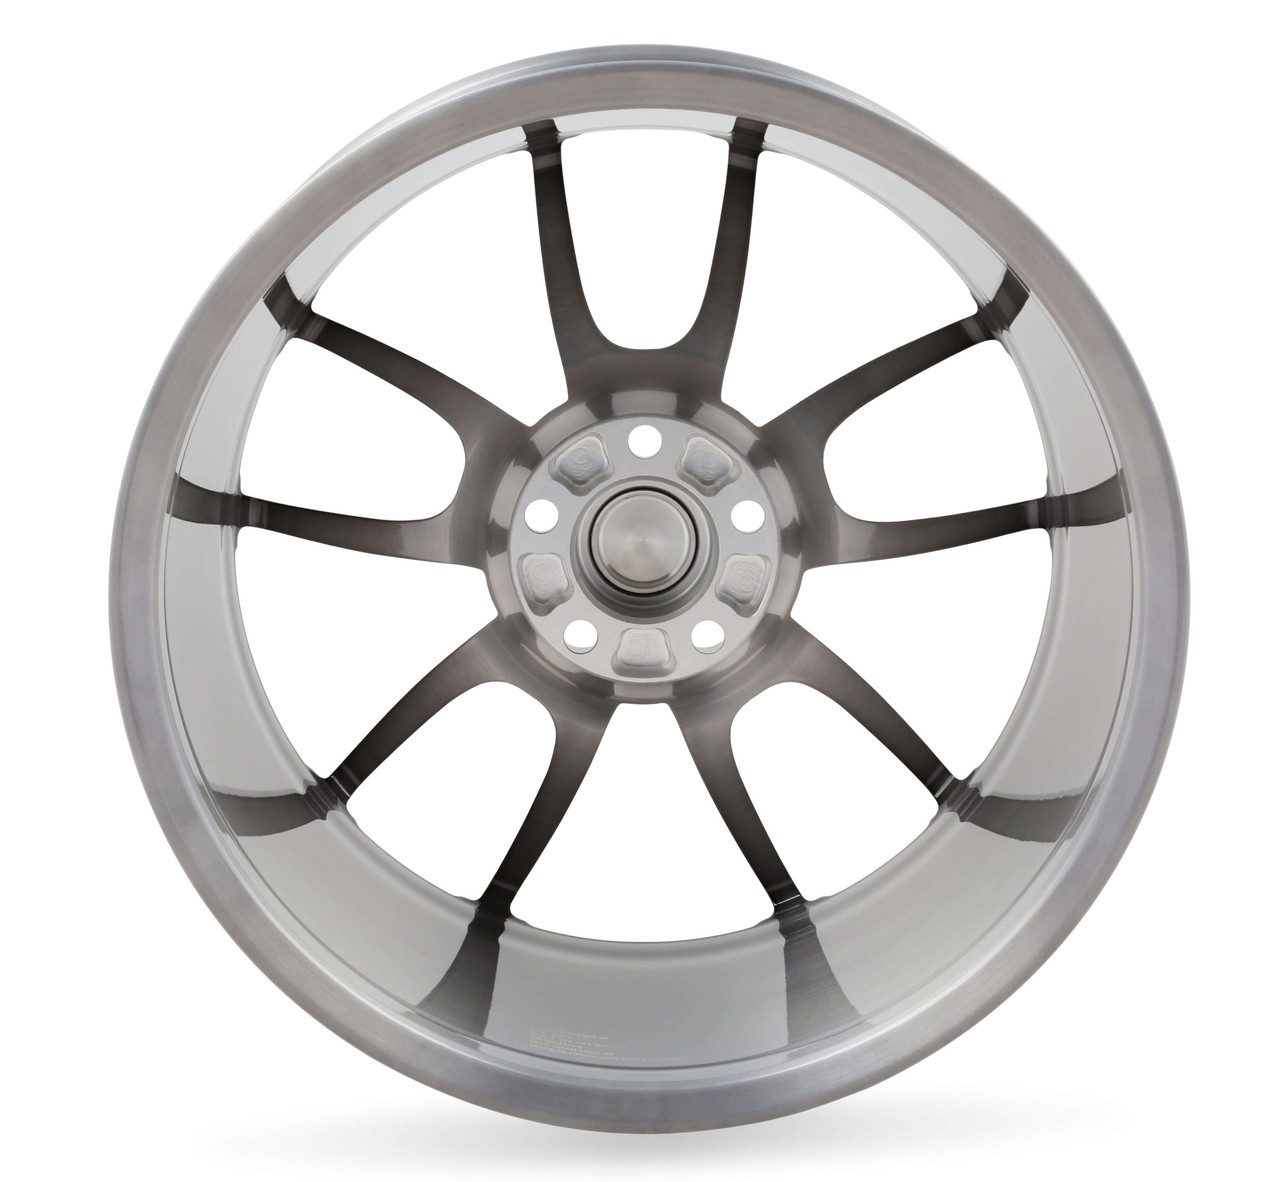 CS21-905430-TR Carroll Shelby Wheels 19x10.5in 5 x 114.3 30mm Offset Smoked Tint